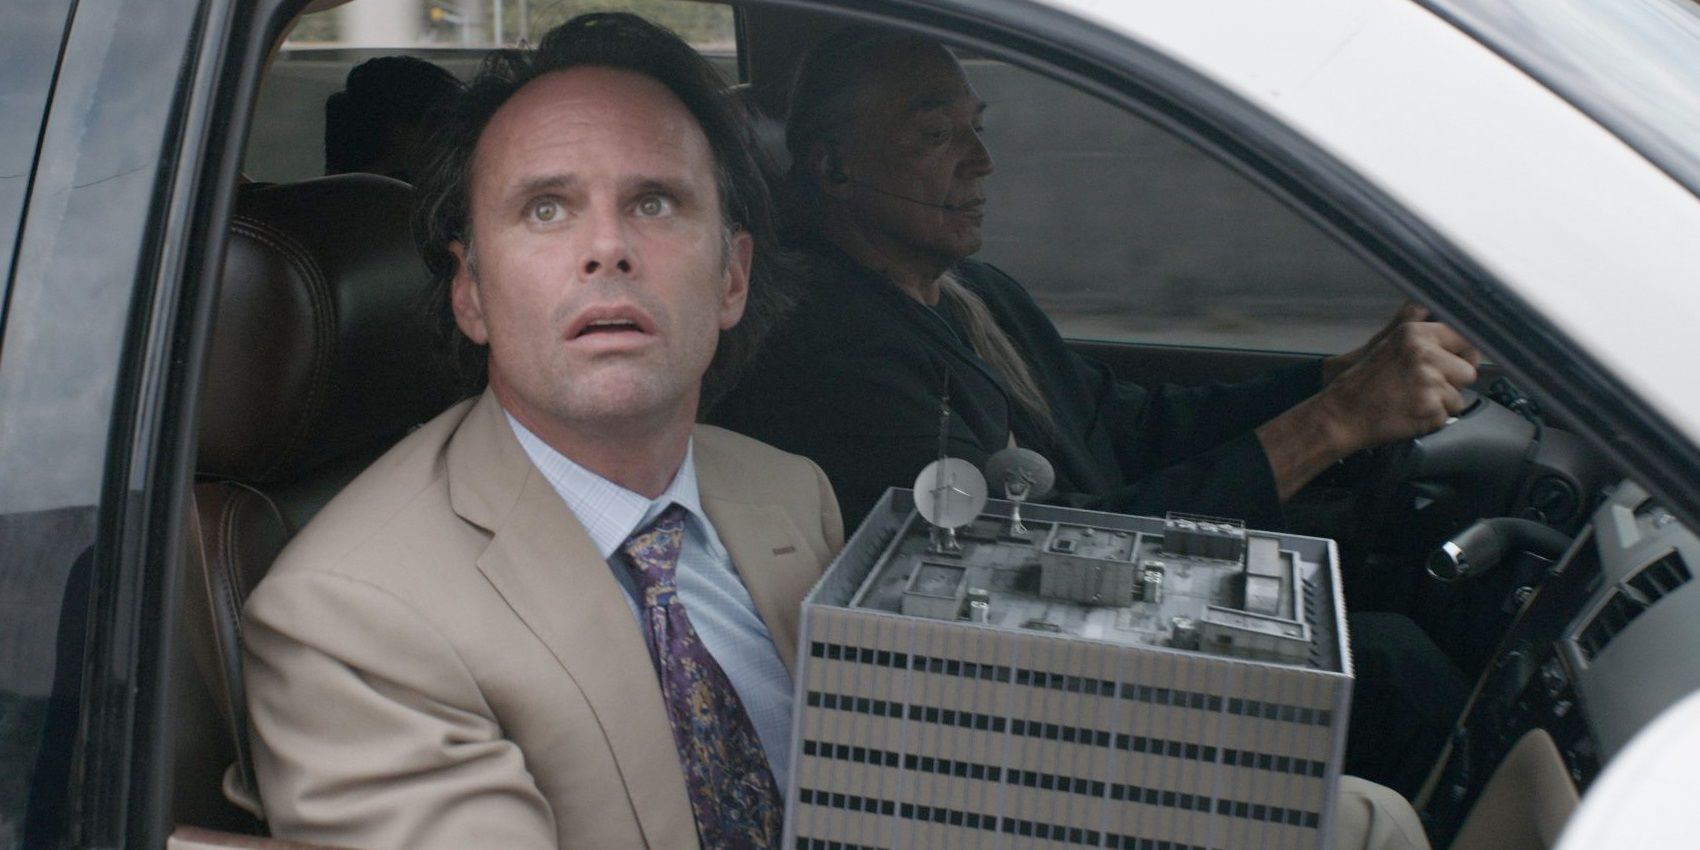 Walton Goggins as Sonny Burch holding a shrunken lab in Ant-Man and the Wasp